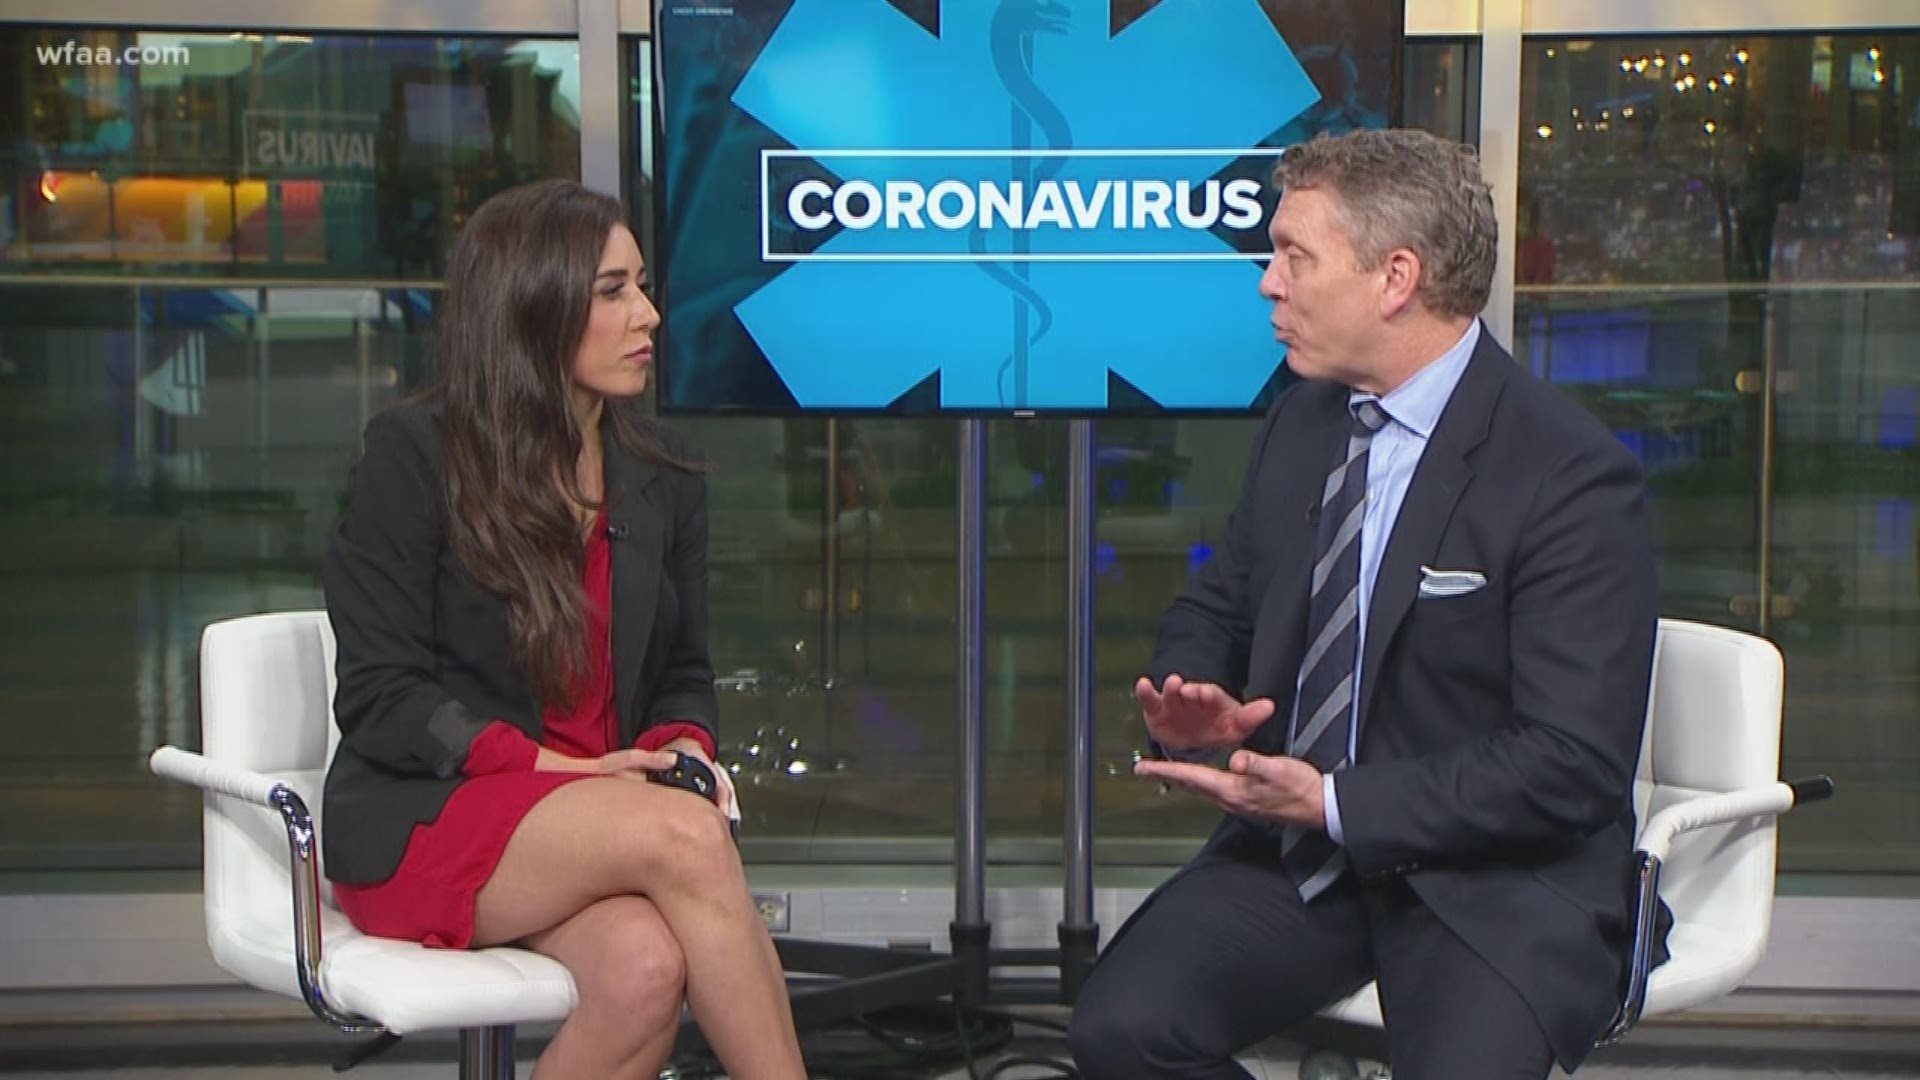 WFAA's Sonia Azad sat down with Dr. Brad Schwall from the Center for Integrative Counseling & Psychology to discuss mental health amid the COVID-19 outbreak.